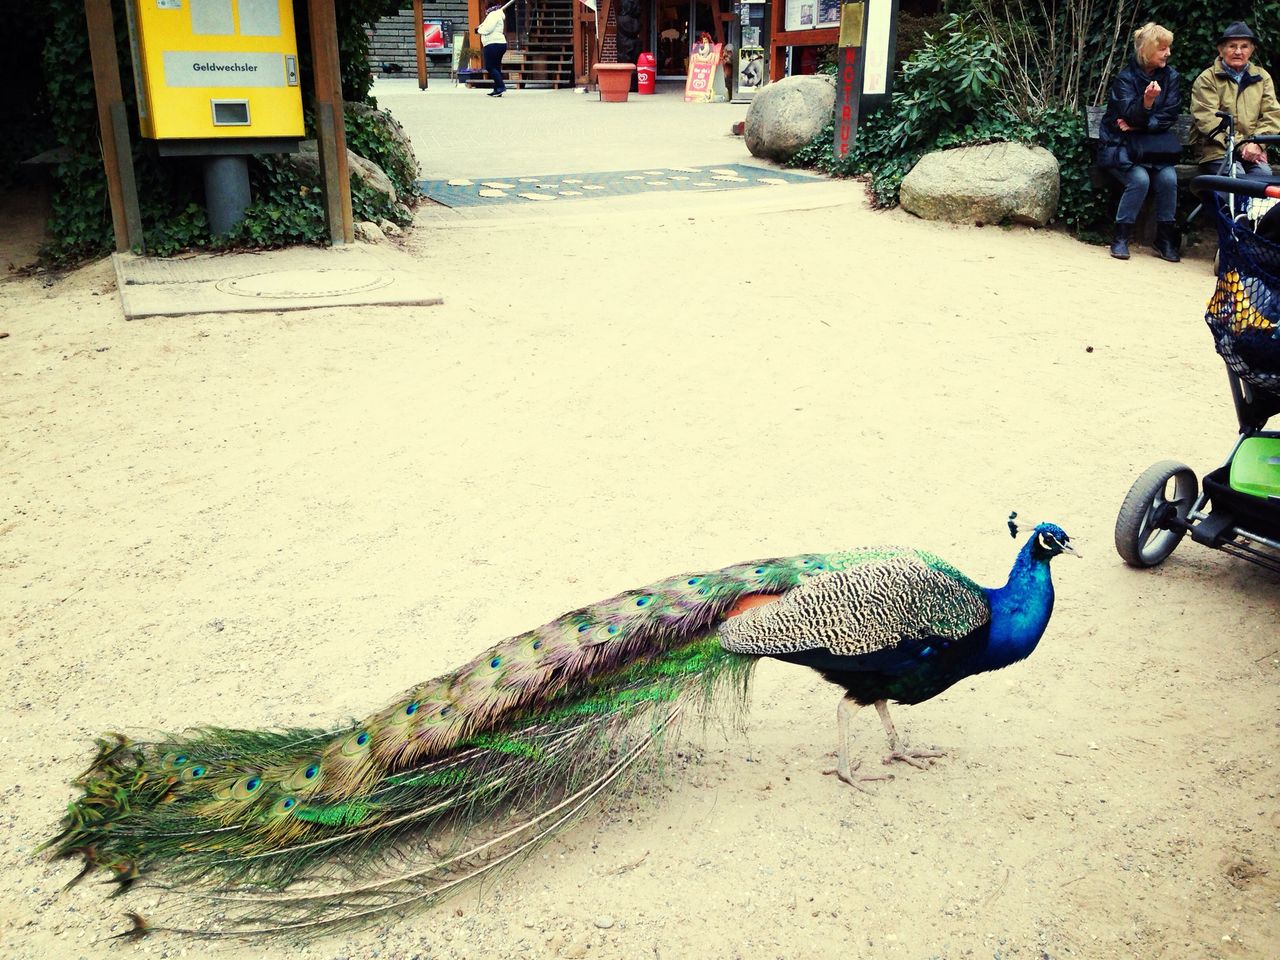 CLOSE-UP OF PEACOCK IN THE BACKGROUND